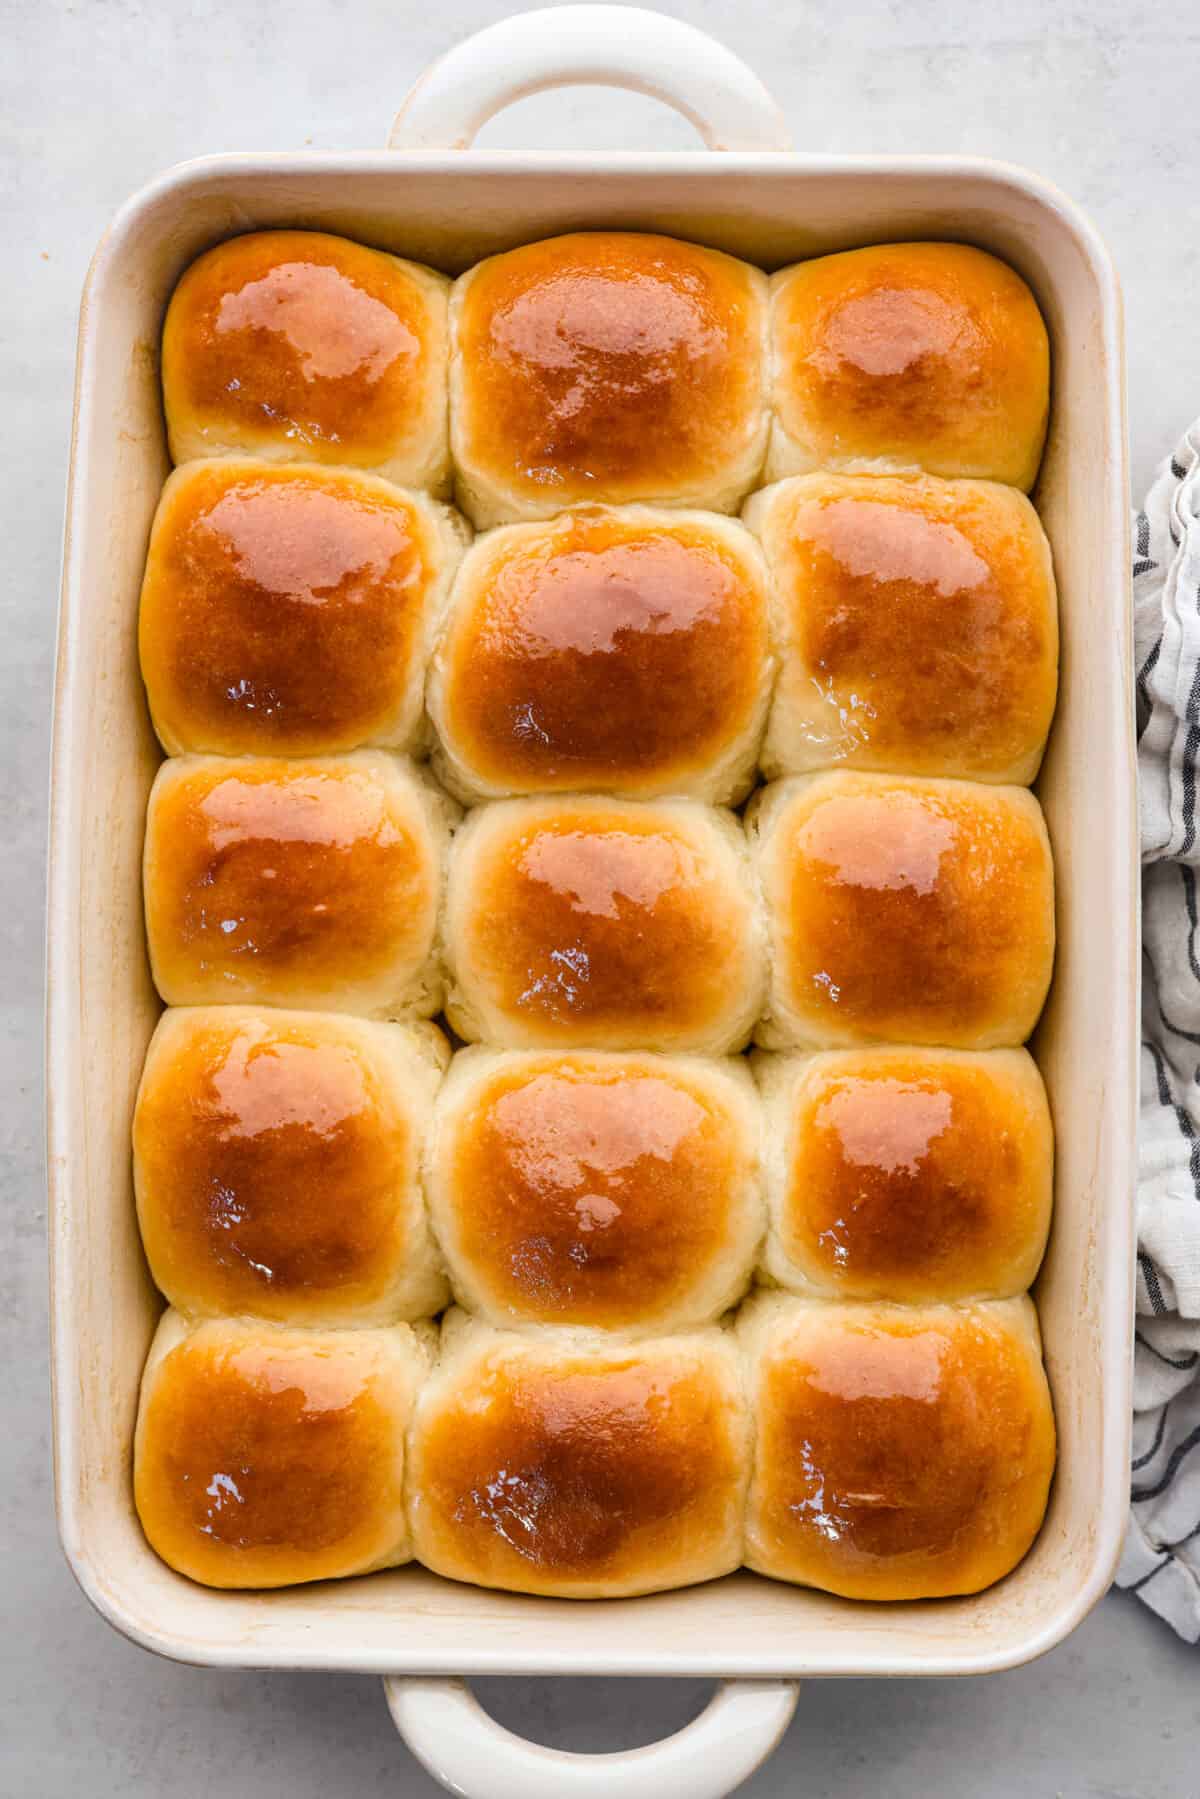 Top view of perfect soft and buttery rolls baked in a baking dish.